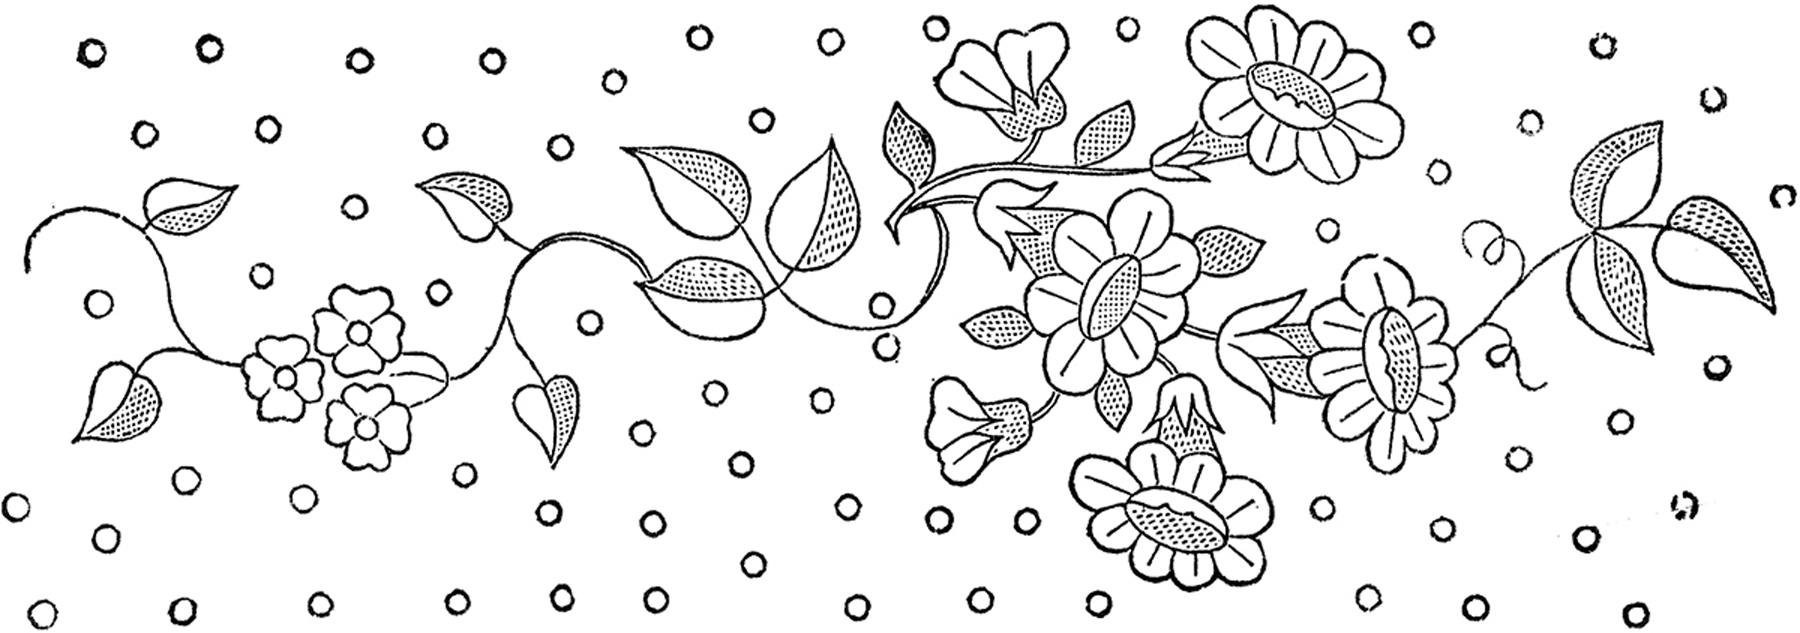 Transfer Patterns For Hand Embroidery Gallery Free Printable Embroidery Transfers Patterns Drawings